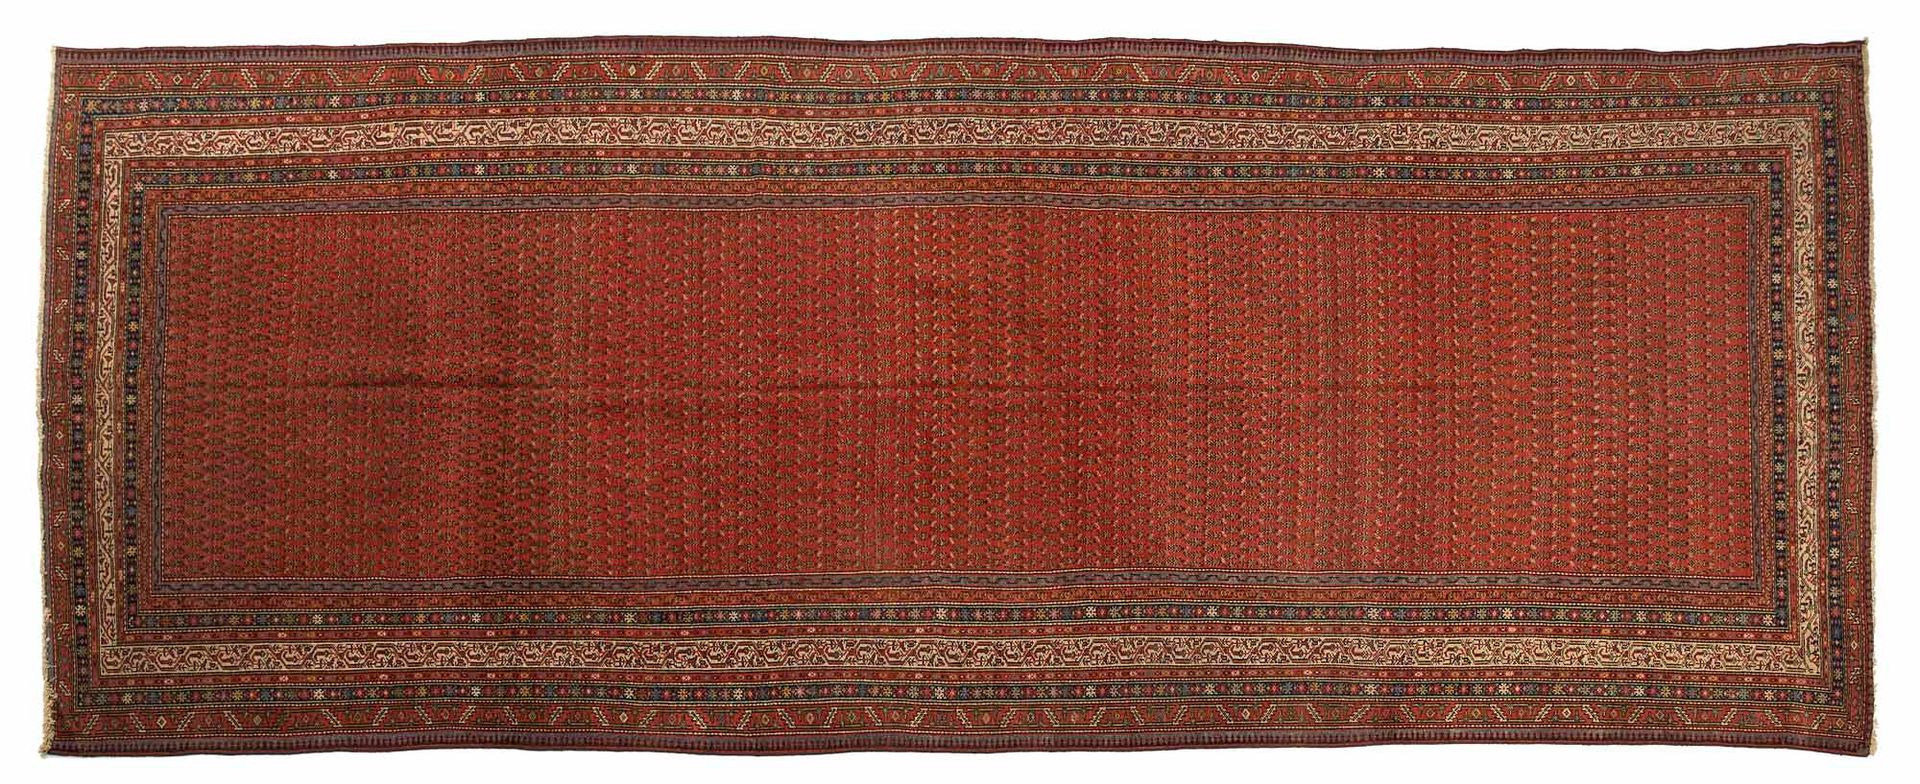 Null Carpet MIR-SARABEND (Persia), end of the 19th century

Dimensions : 490 x 2&hellip;